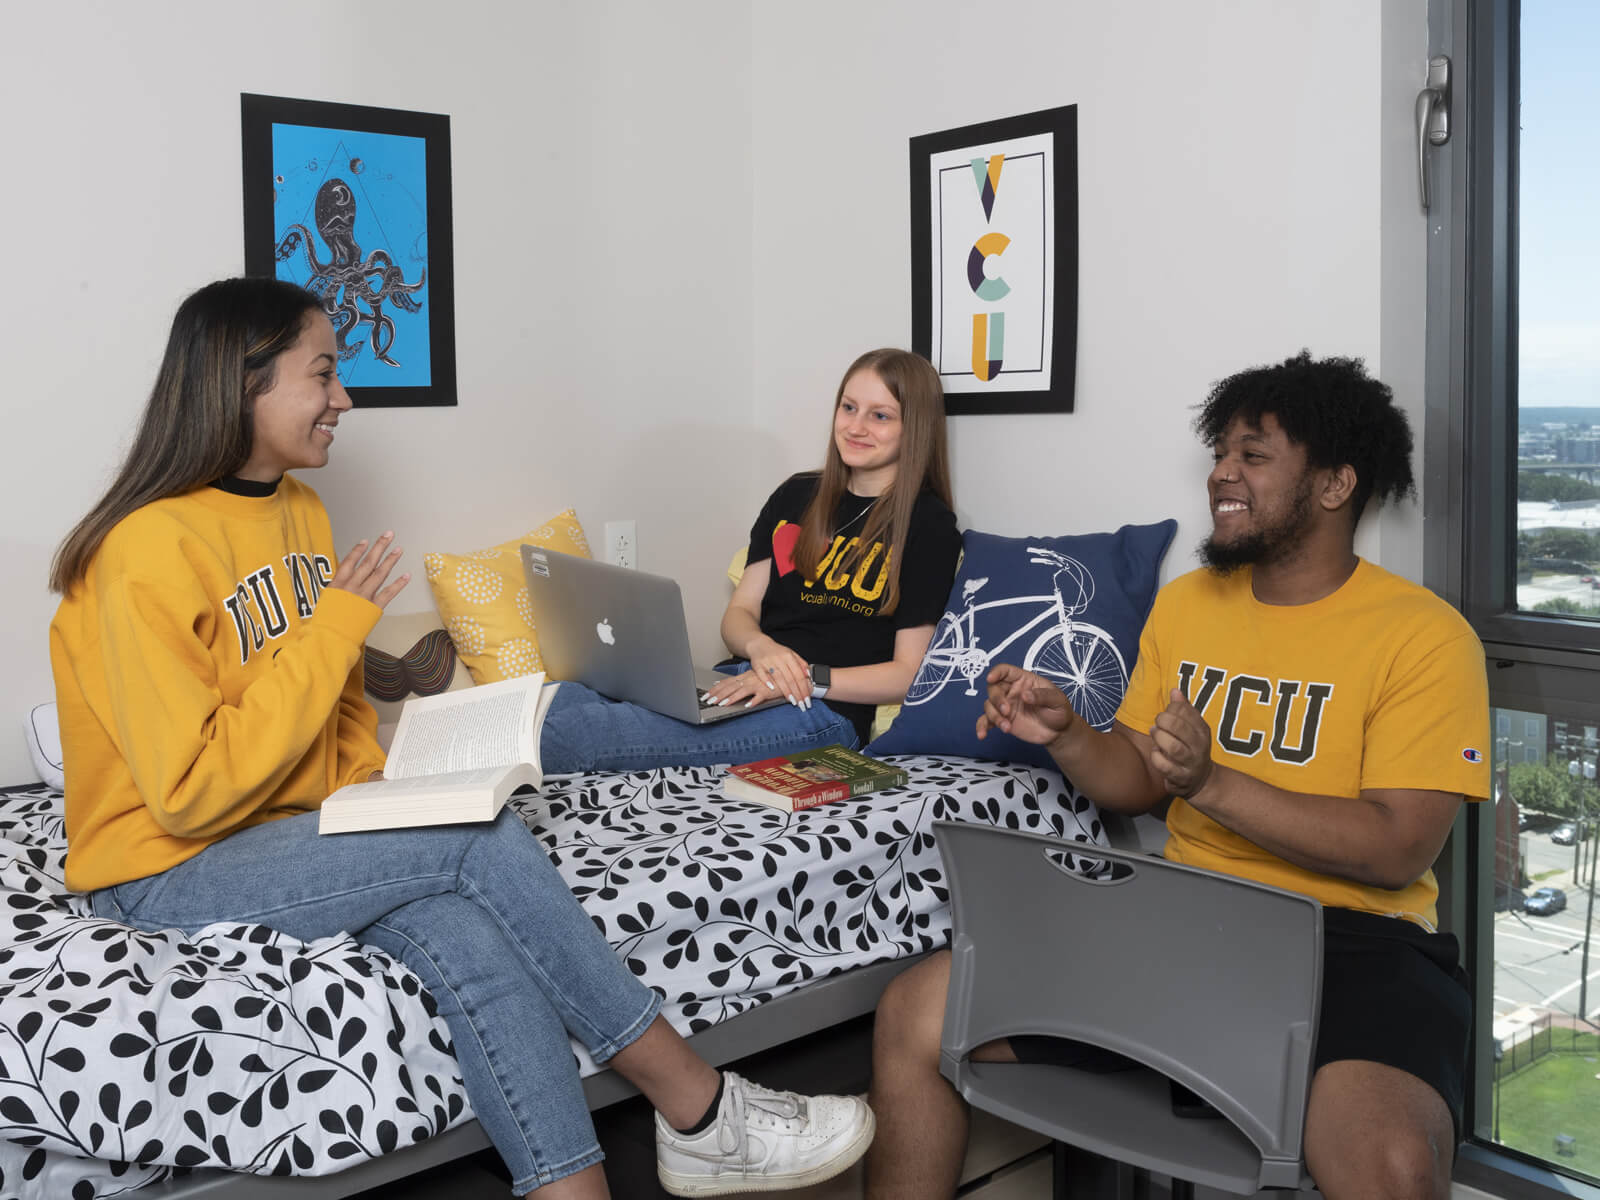 Students in a VCU dorm room